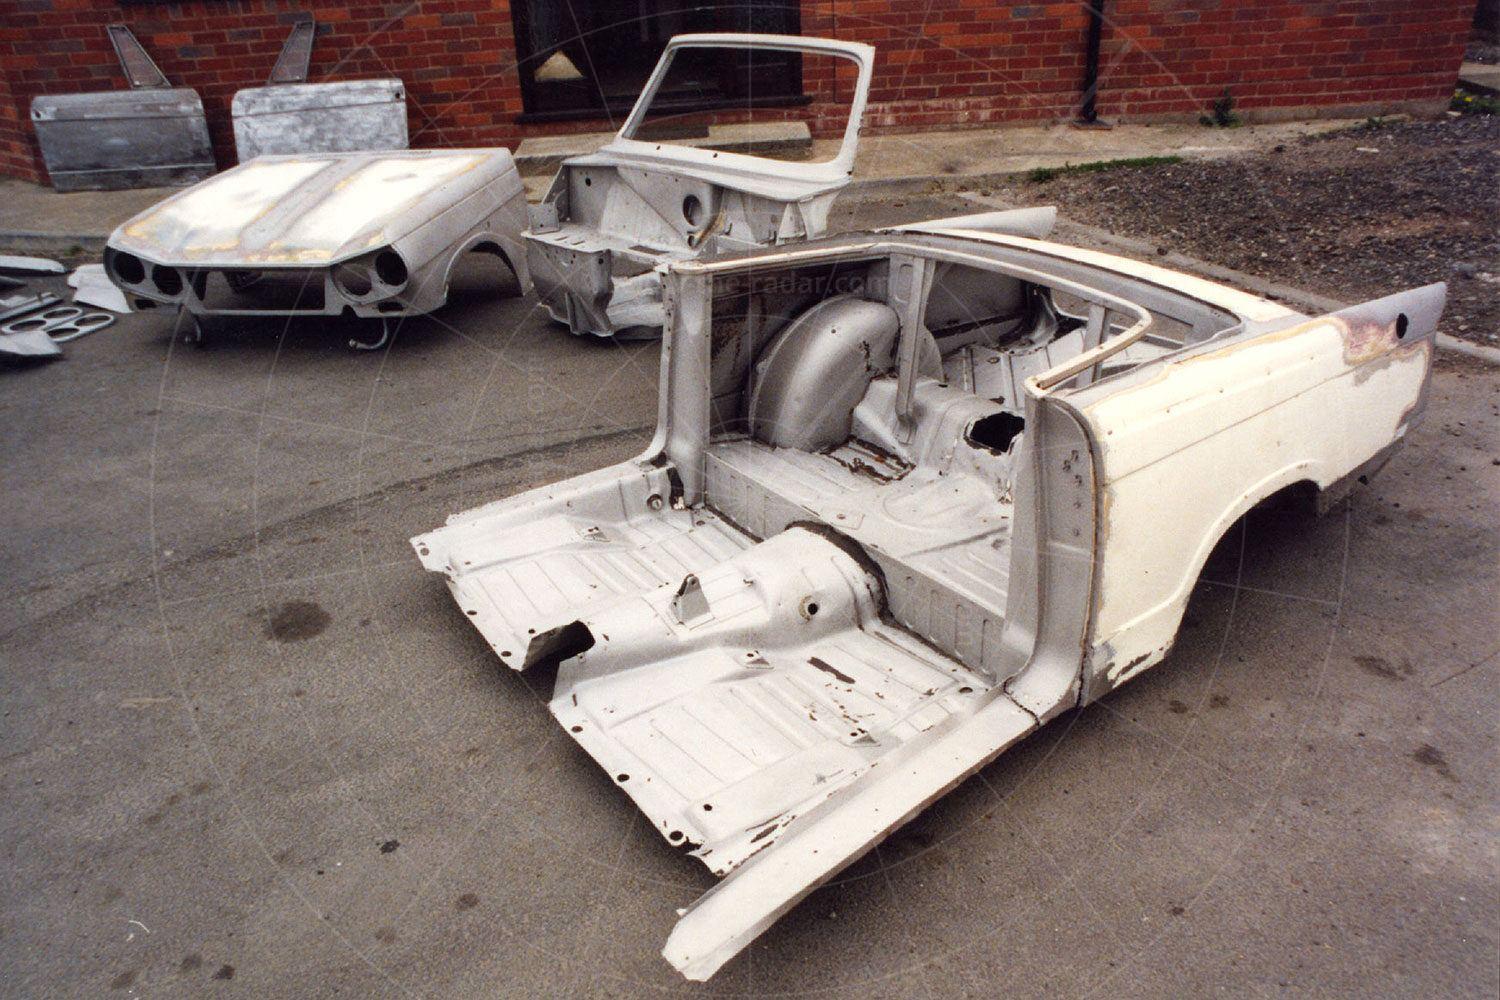 The major sections of the car were shotblasted ready for painting Pic: magiccarpics.co.uk | The major sections of the car were shotblasted ready for painting